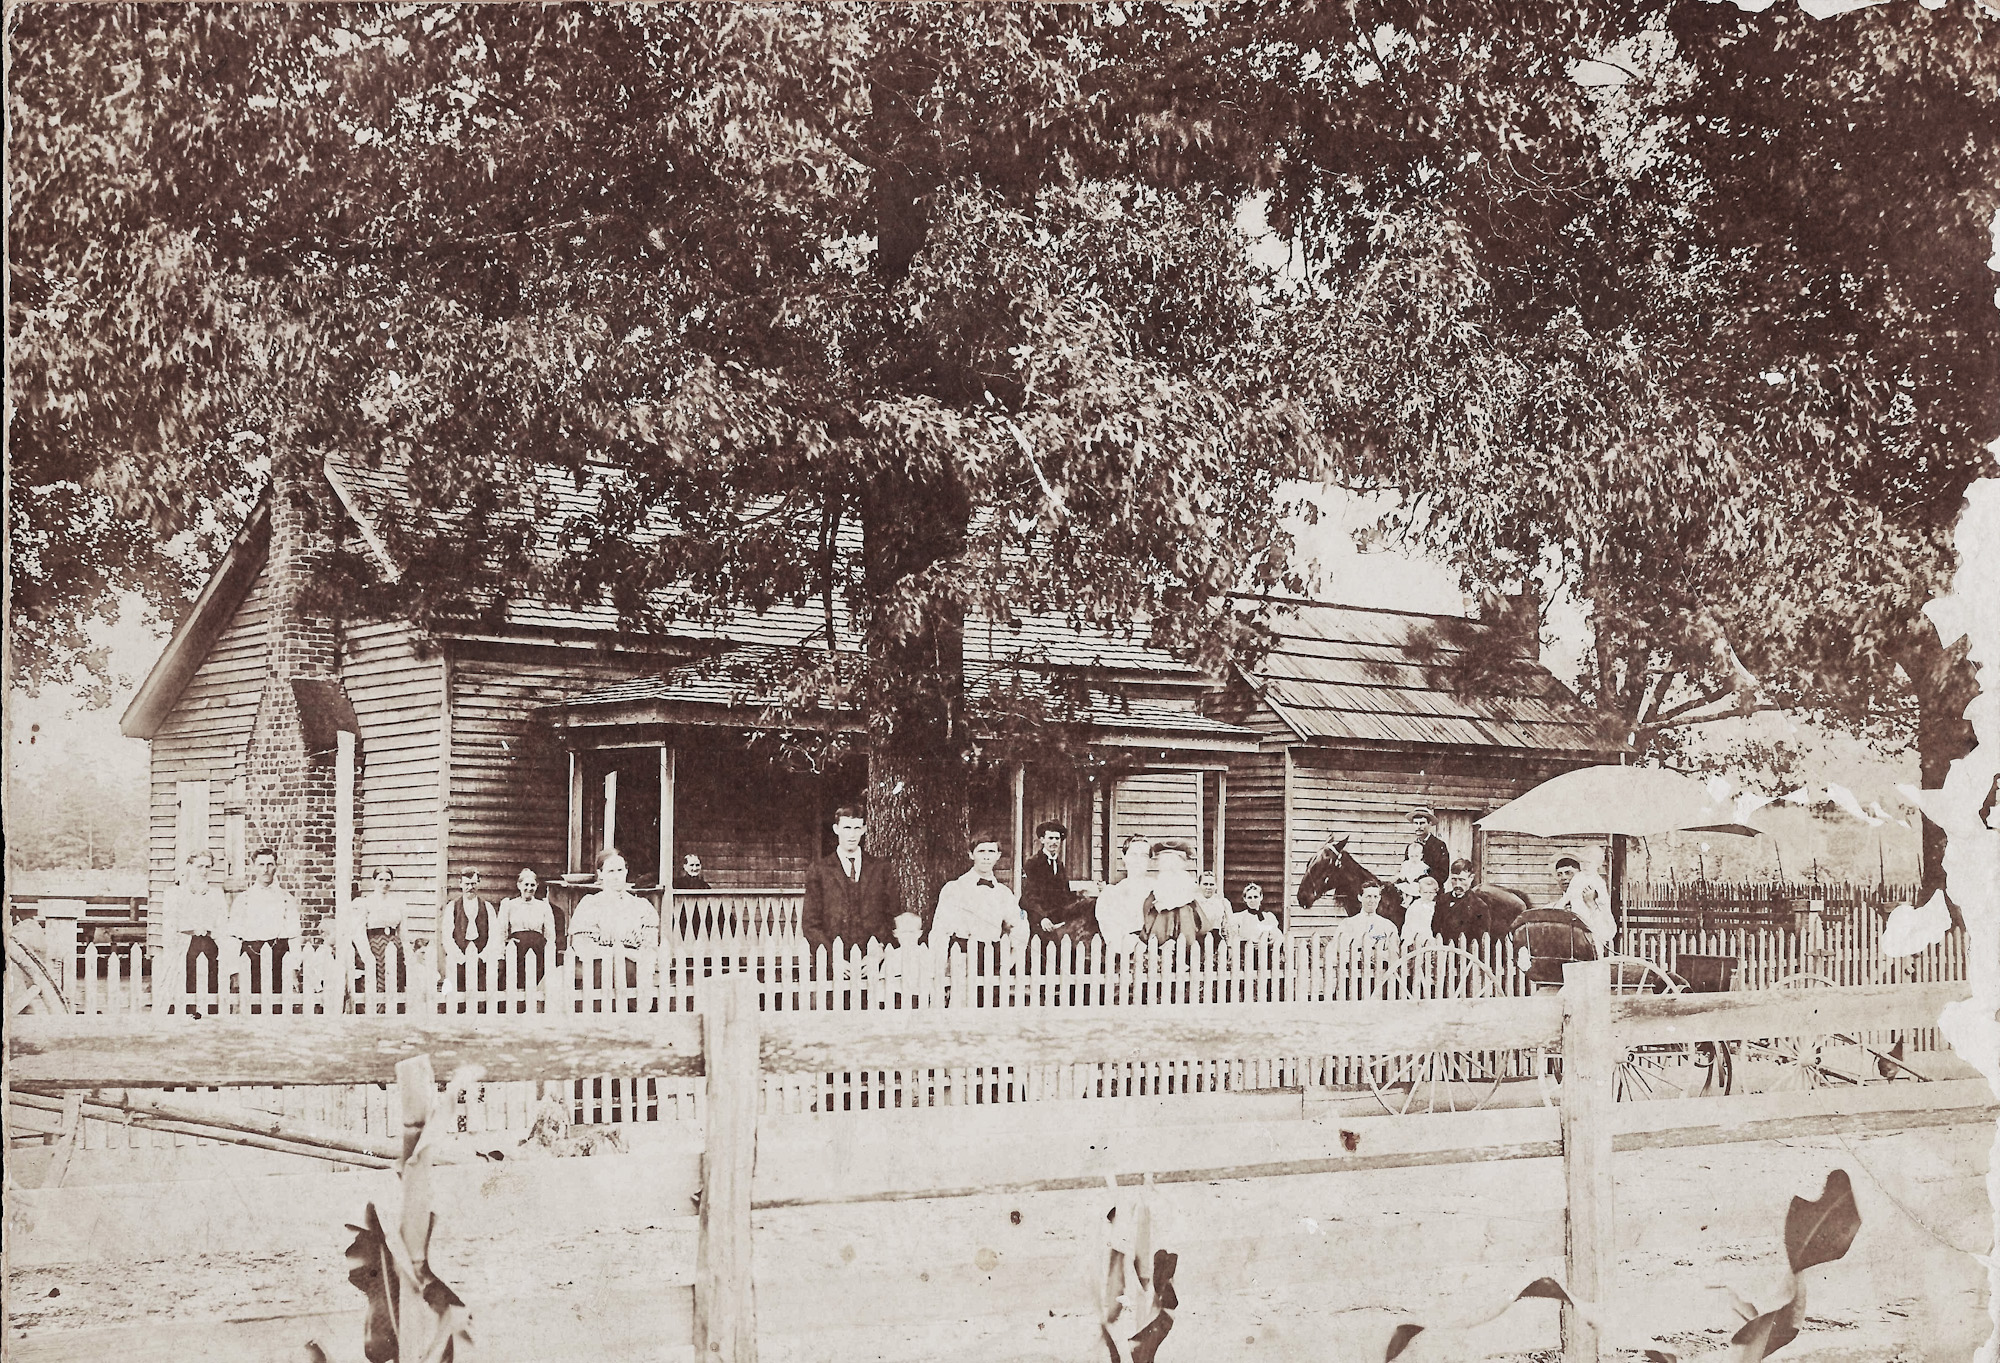 This is a picture of my great-great-grandfather's home, believed to have been taken in the late 1800s. The man on horseback is believed to be my great-grandfather. Some of the people pictured are neighbors.  We had to have the house torn down in the 1970s after it was heavily damaged by lightning. View full size.